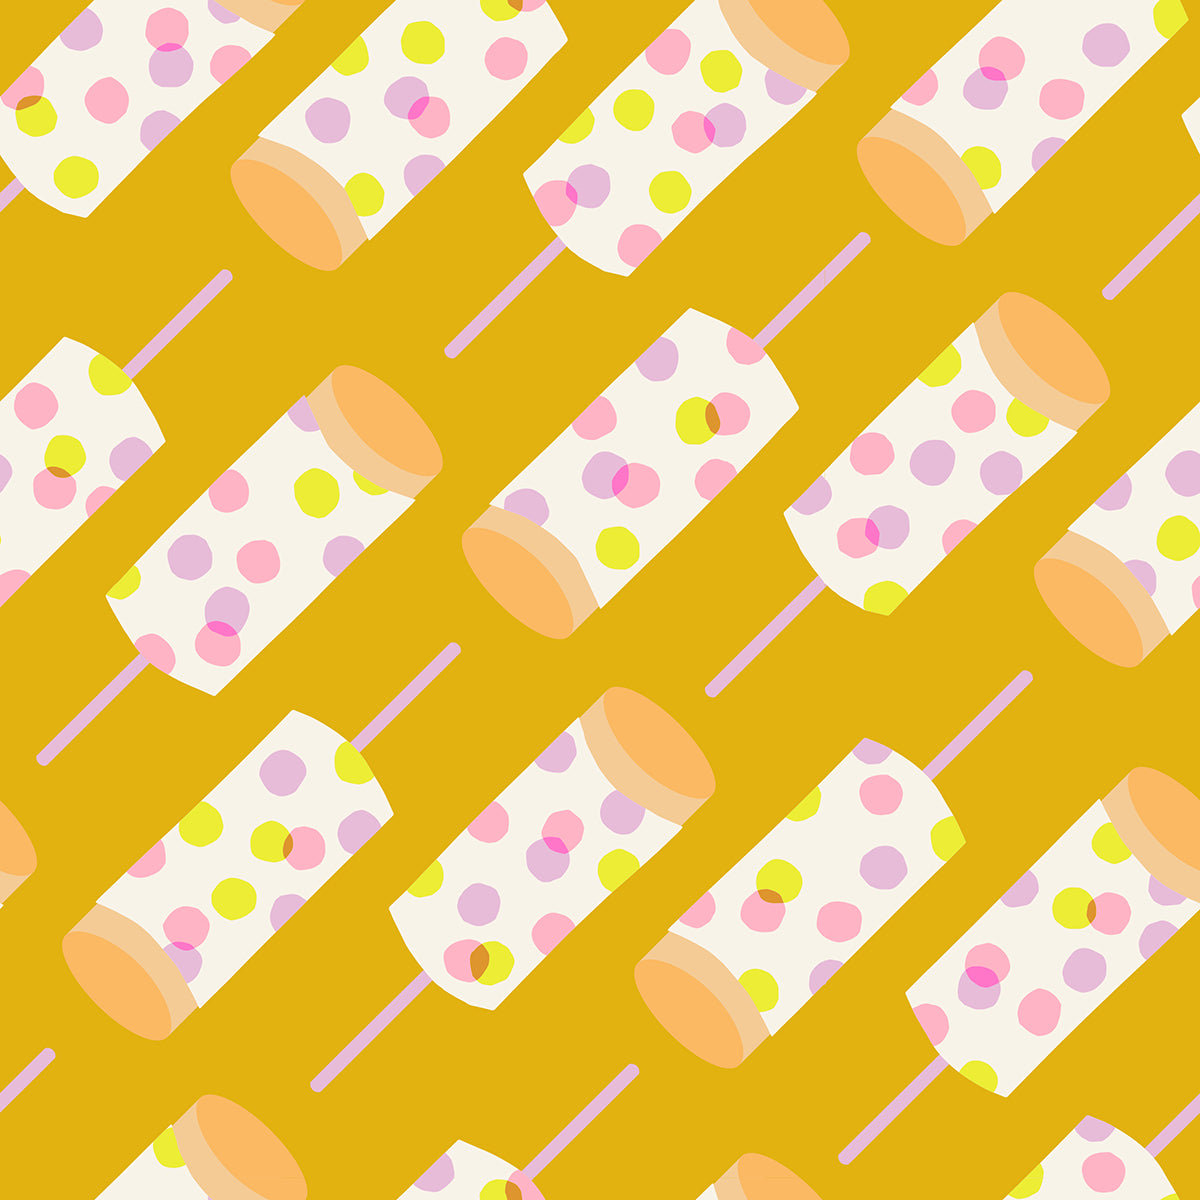 Sugar Cone Quilt Fabric by Ruby Star Society - Push Up Pops in Goldenrod Yellow - RS3060 11